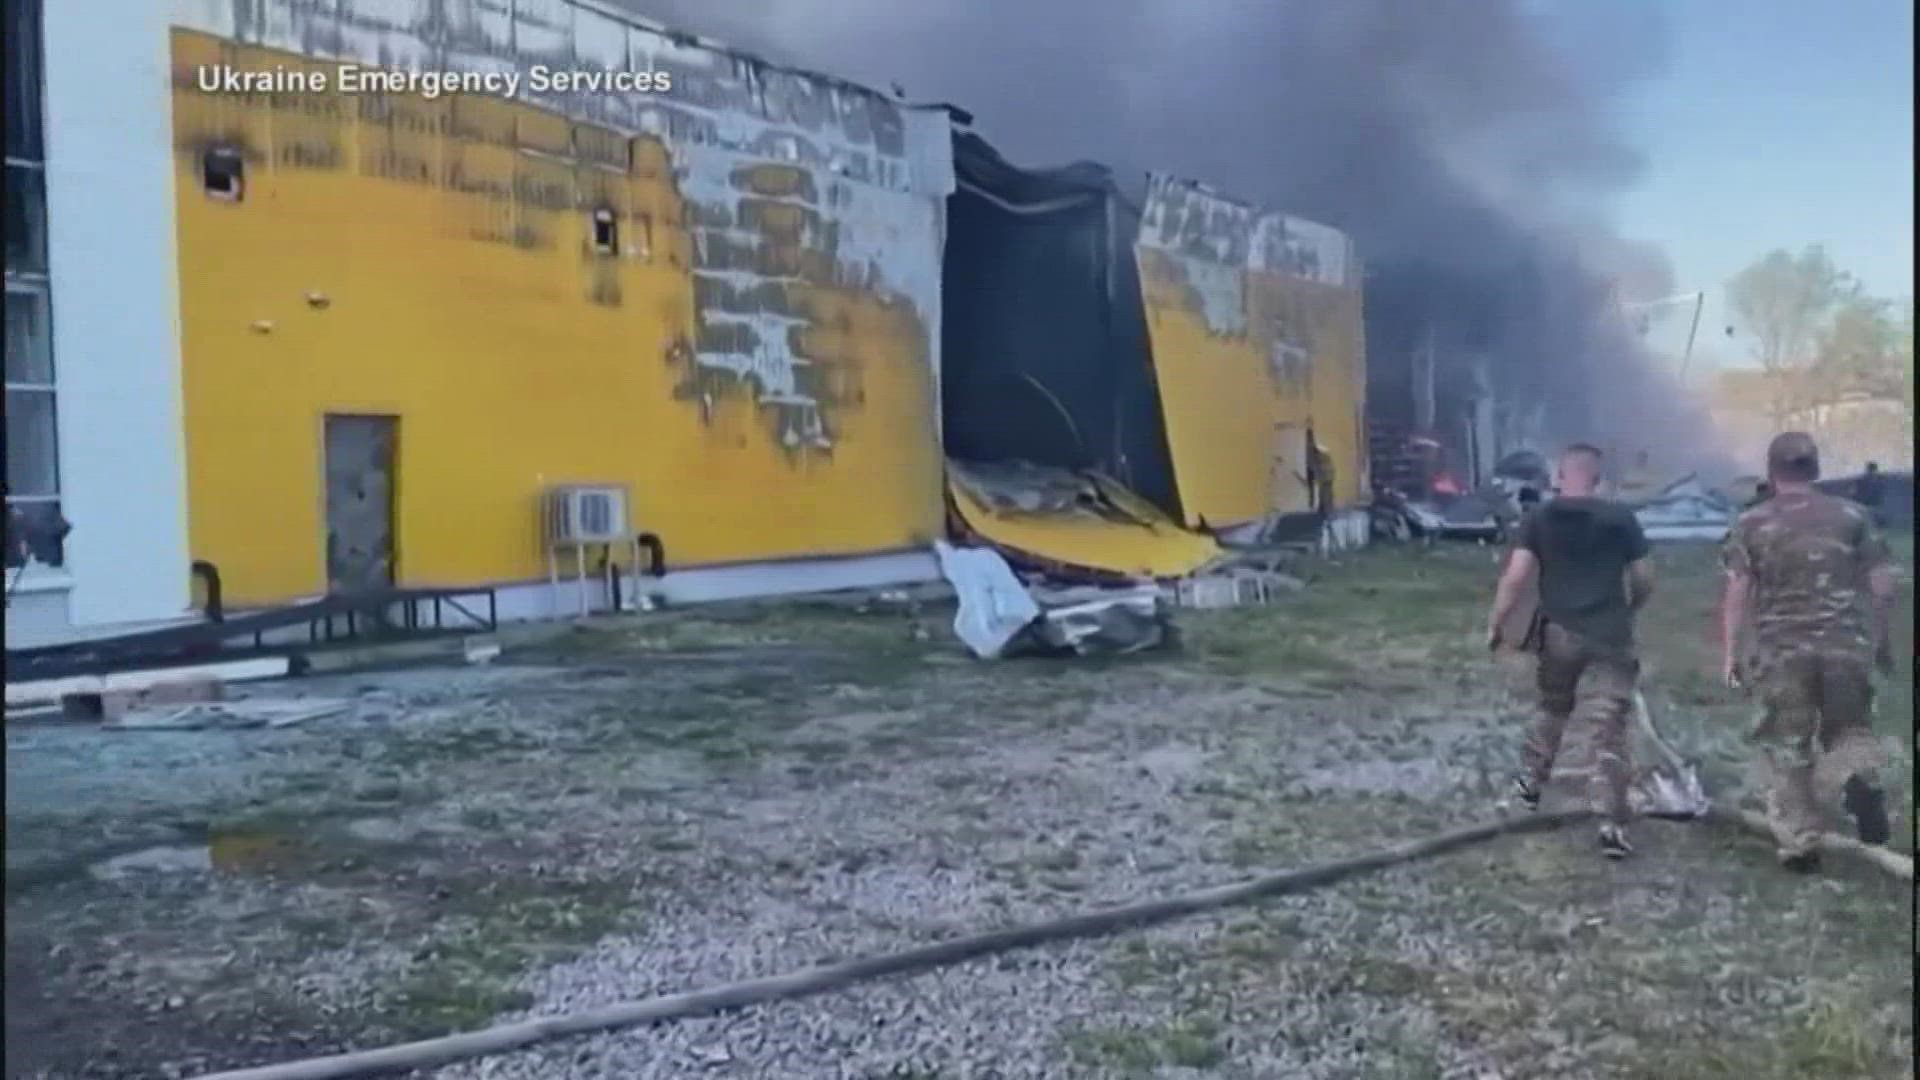 Ukrainian officials say scores of civilians may have been killed or injured in the attack on the city of Kremenchuk.